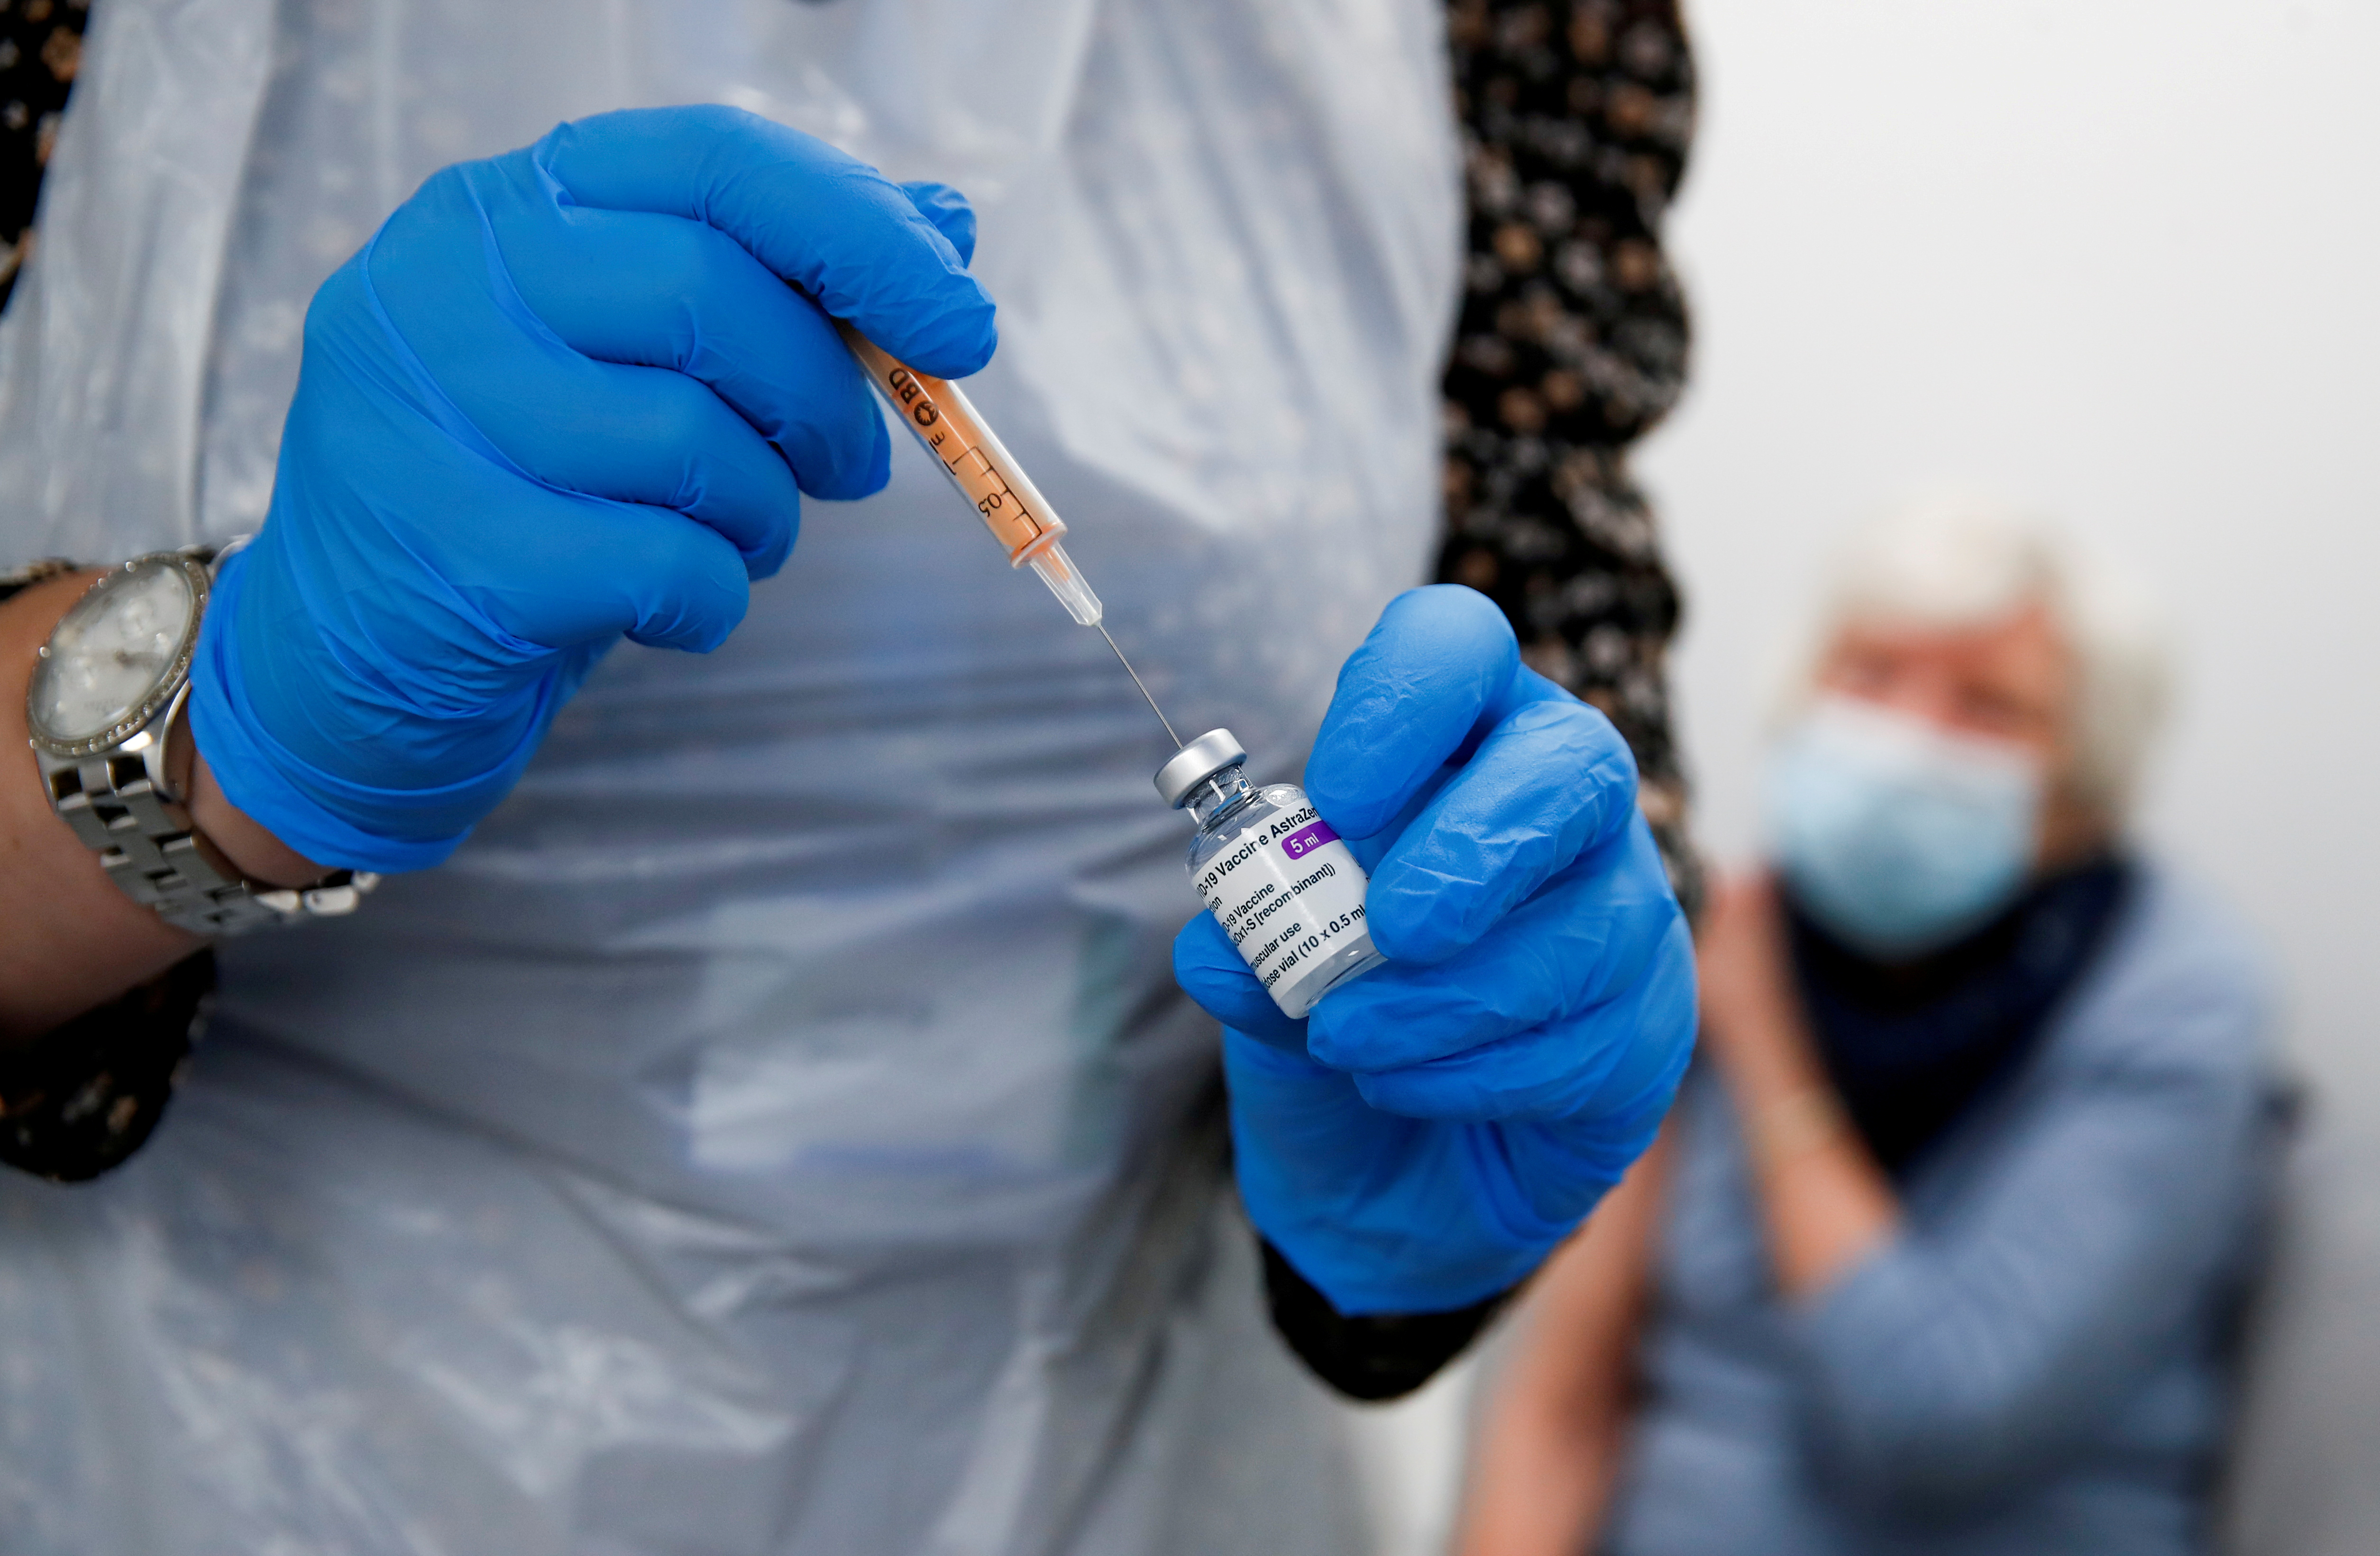 A health worker fills a syringe with a dose of the Oxford/AstraZeneca COVID-19 vaccine